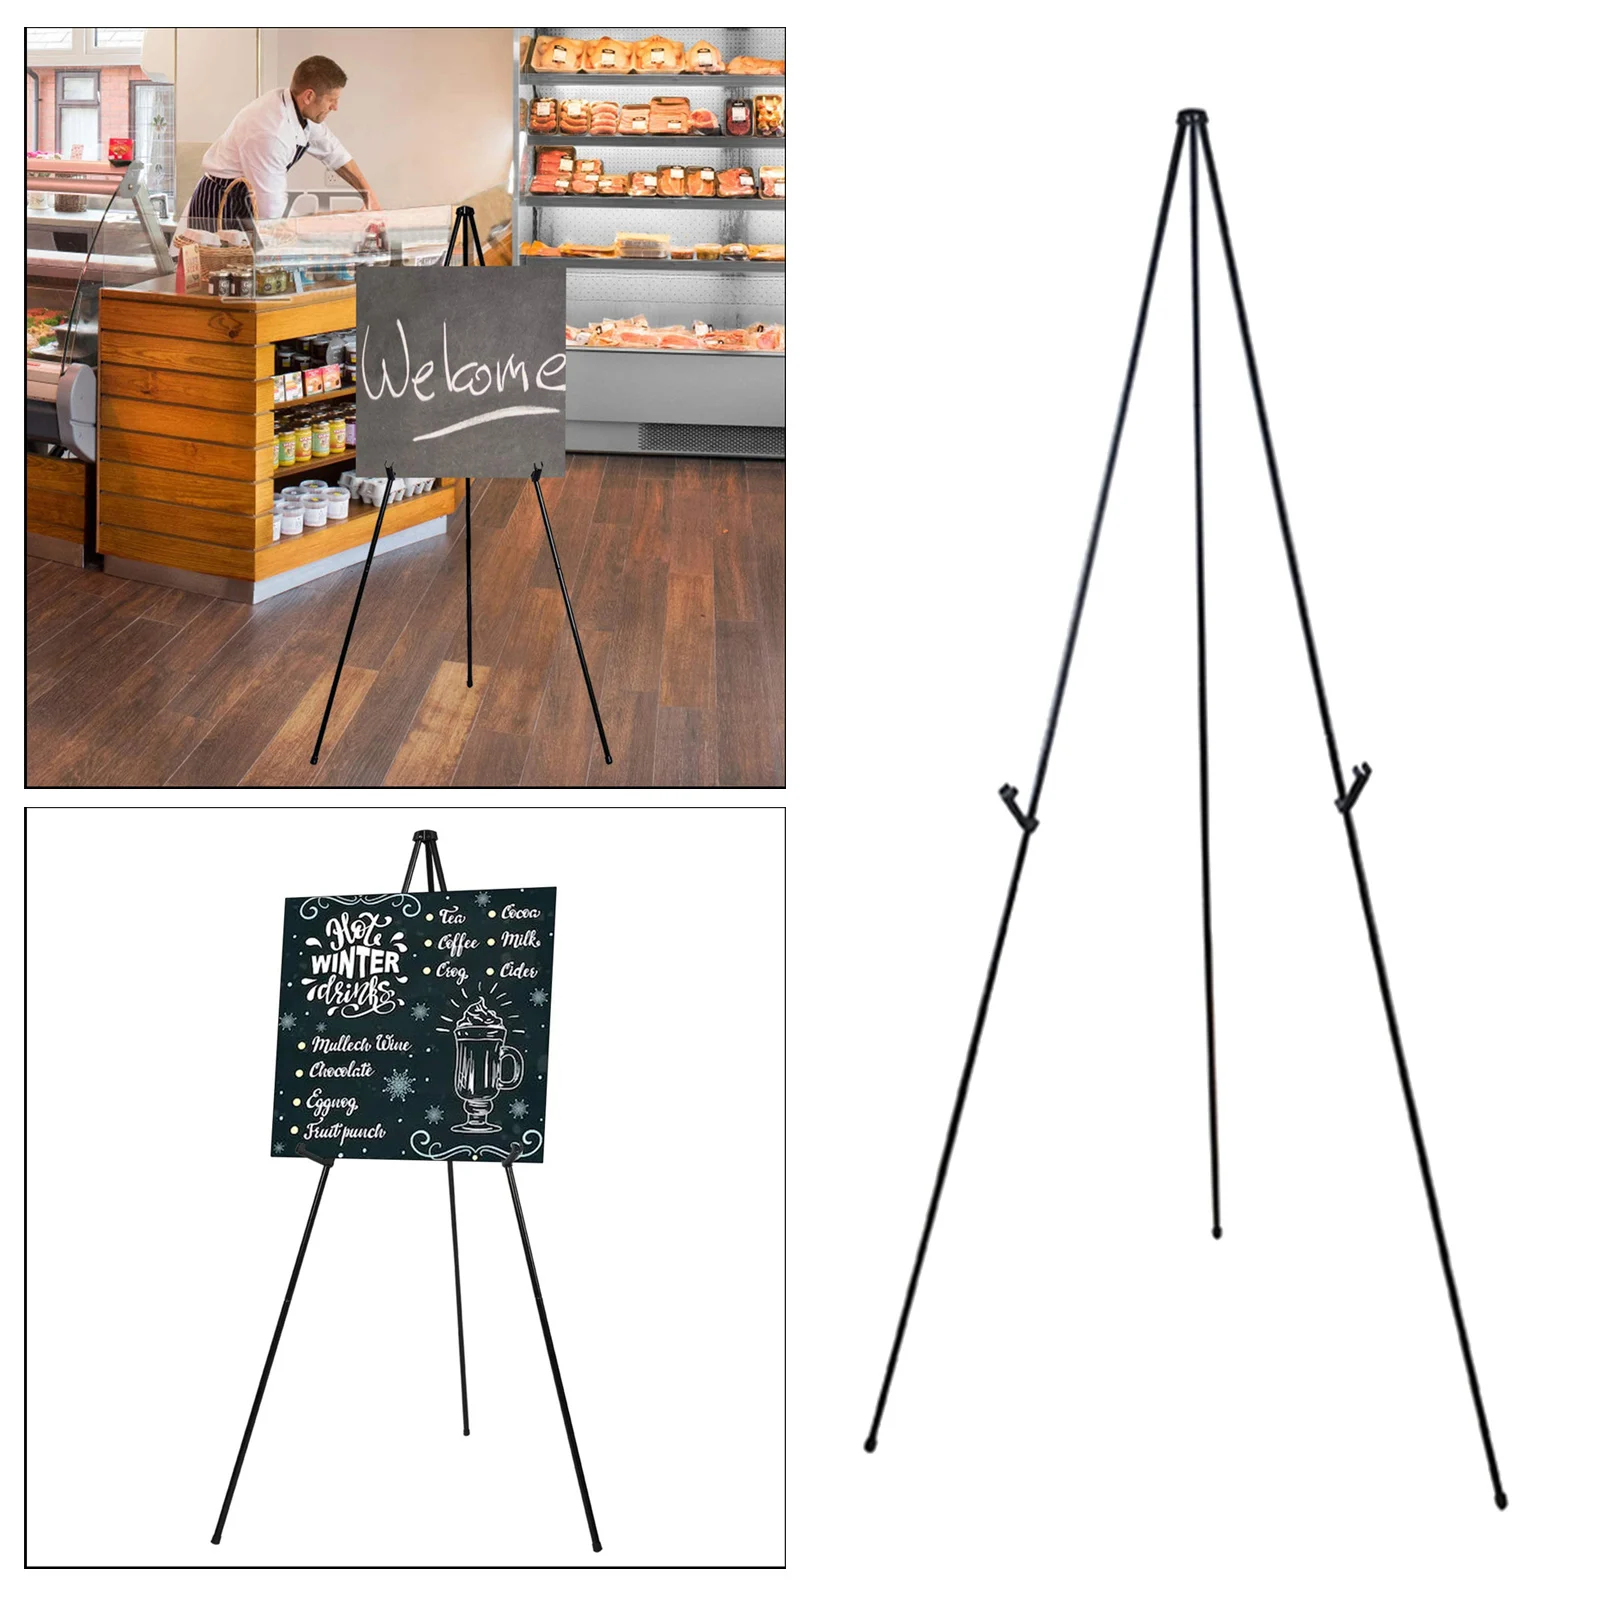 Easy Folding Artist Painting Easel Tripod Display Stand Crafts